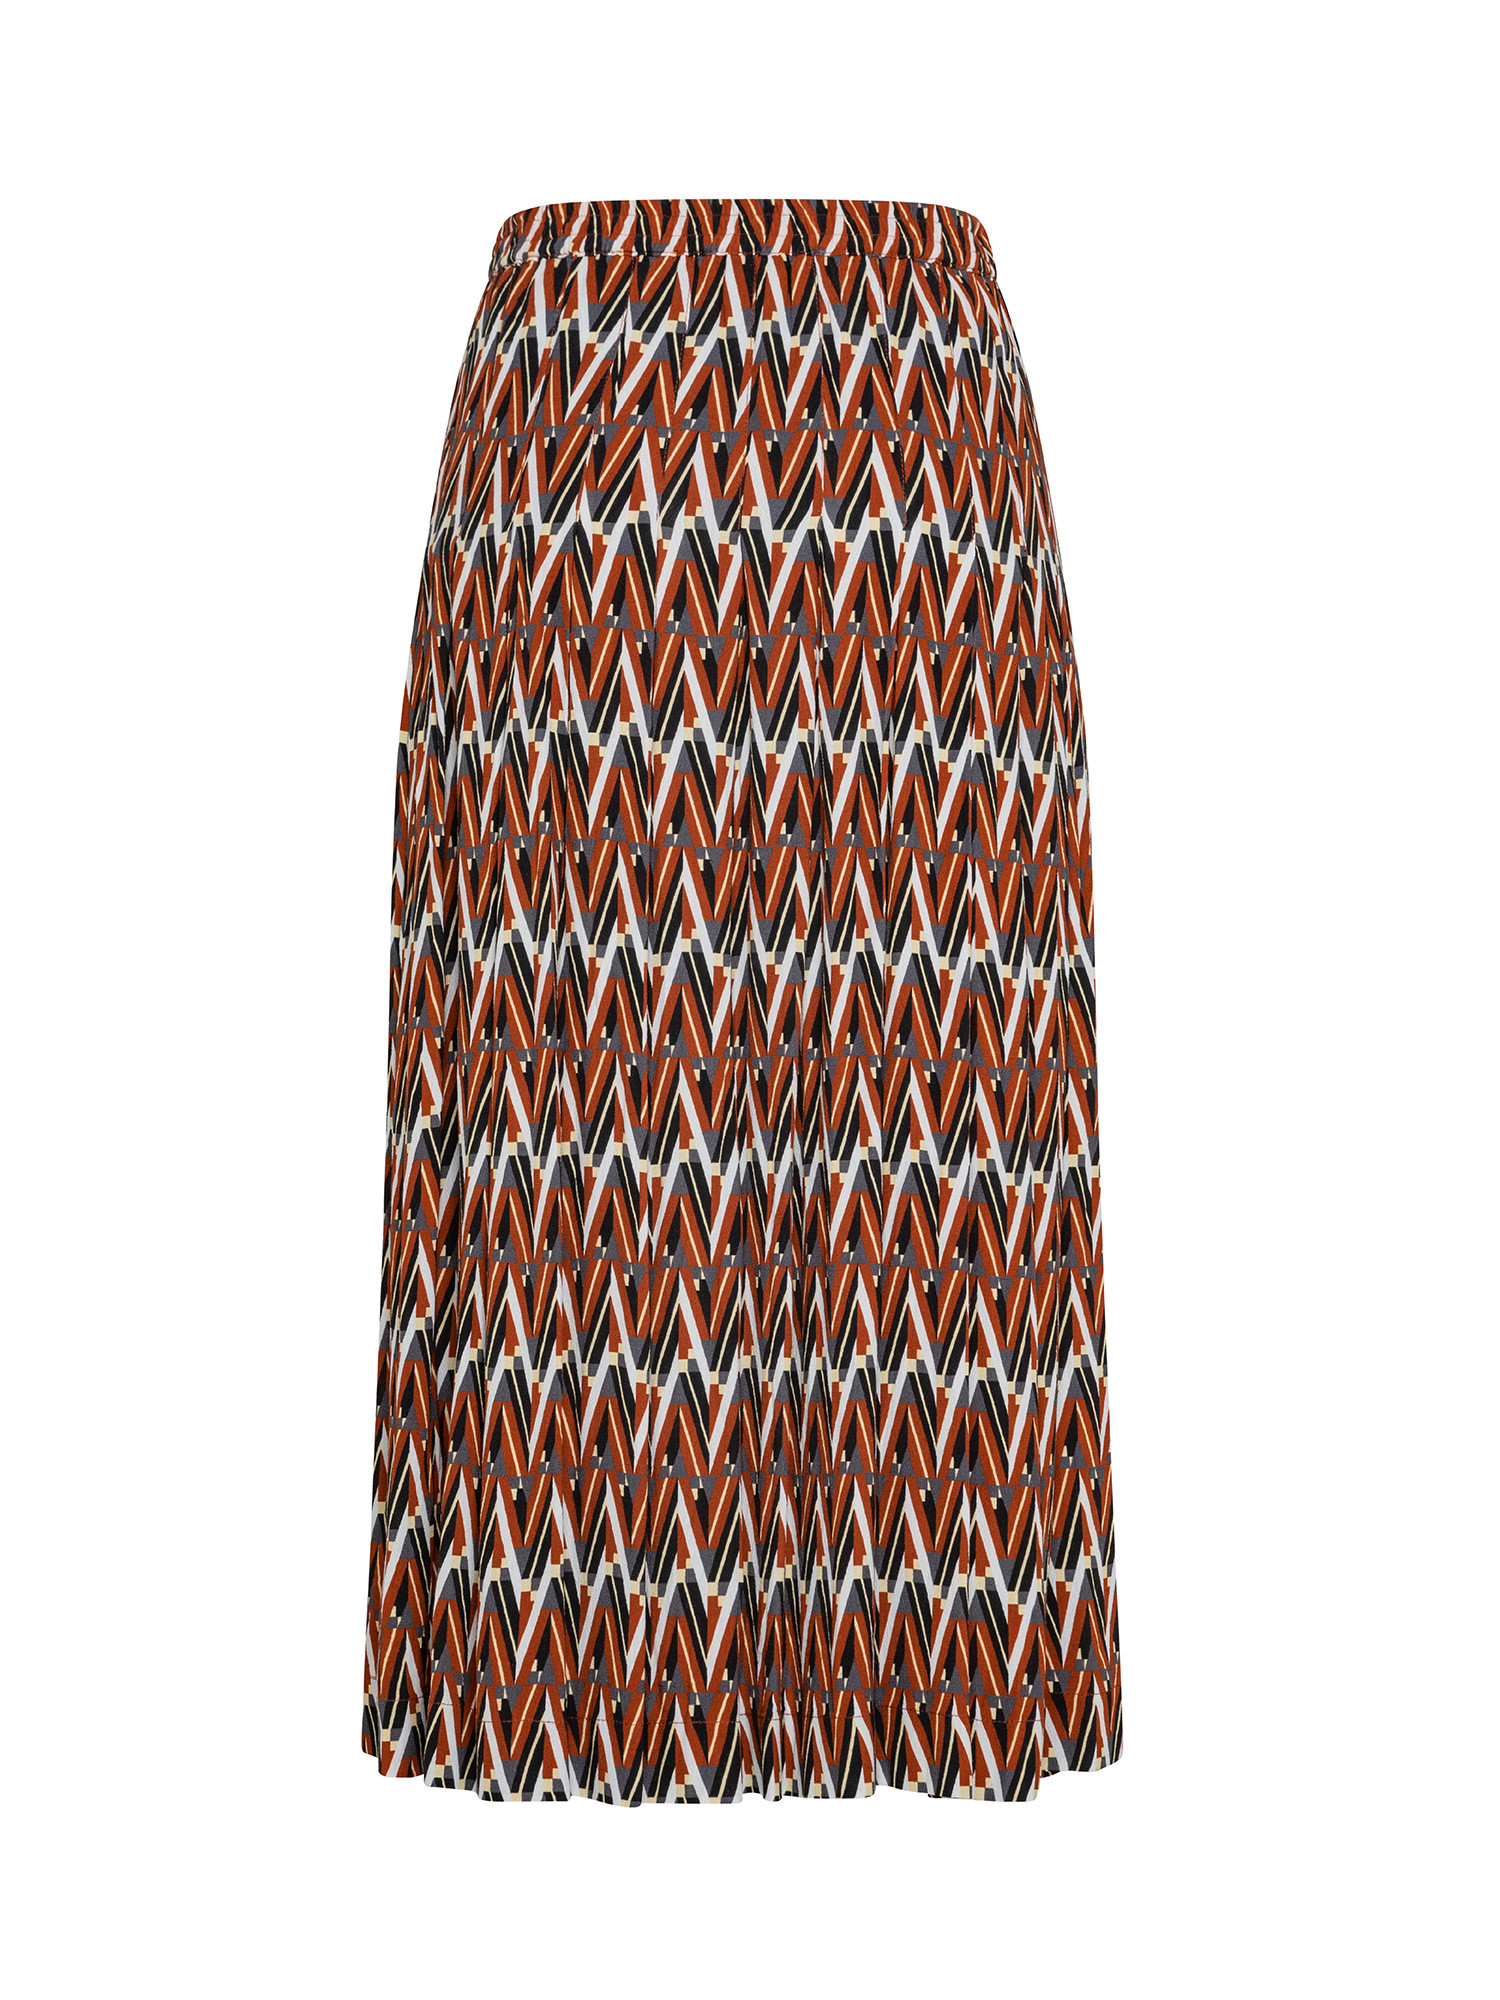 Pleated midi skirt in viscose crepe, Brown, large image number 1